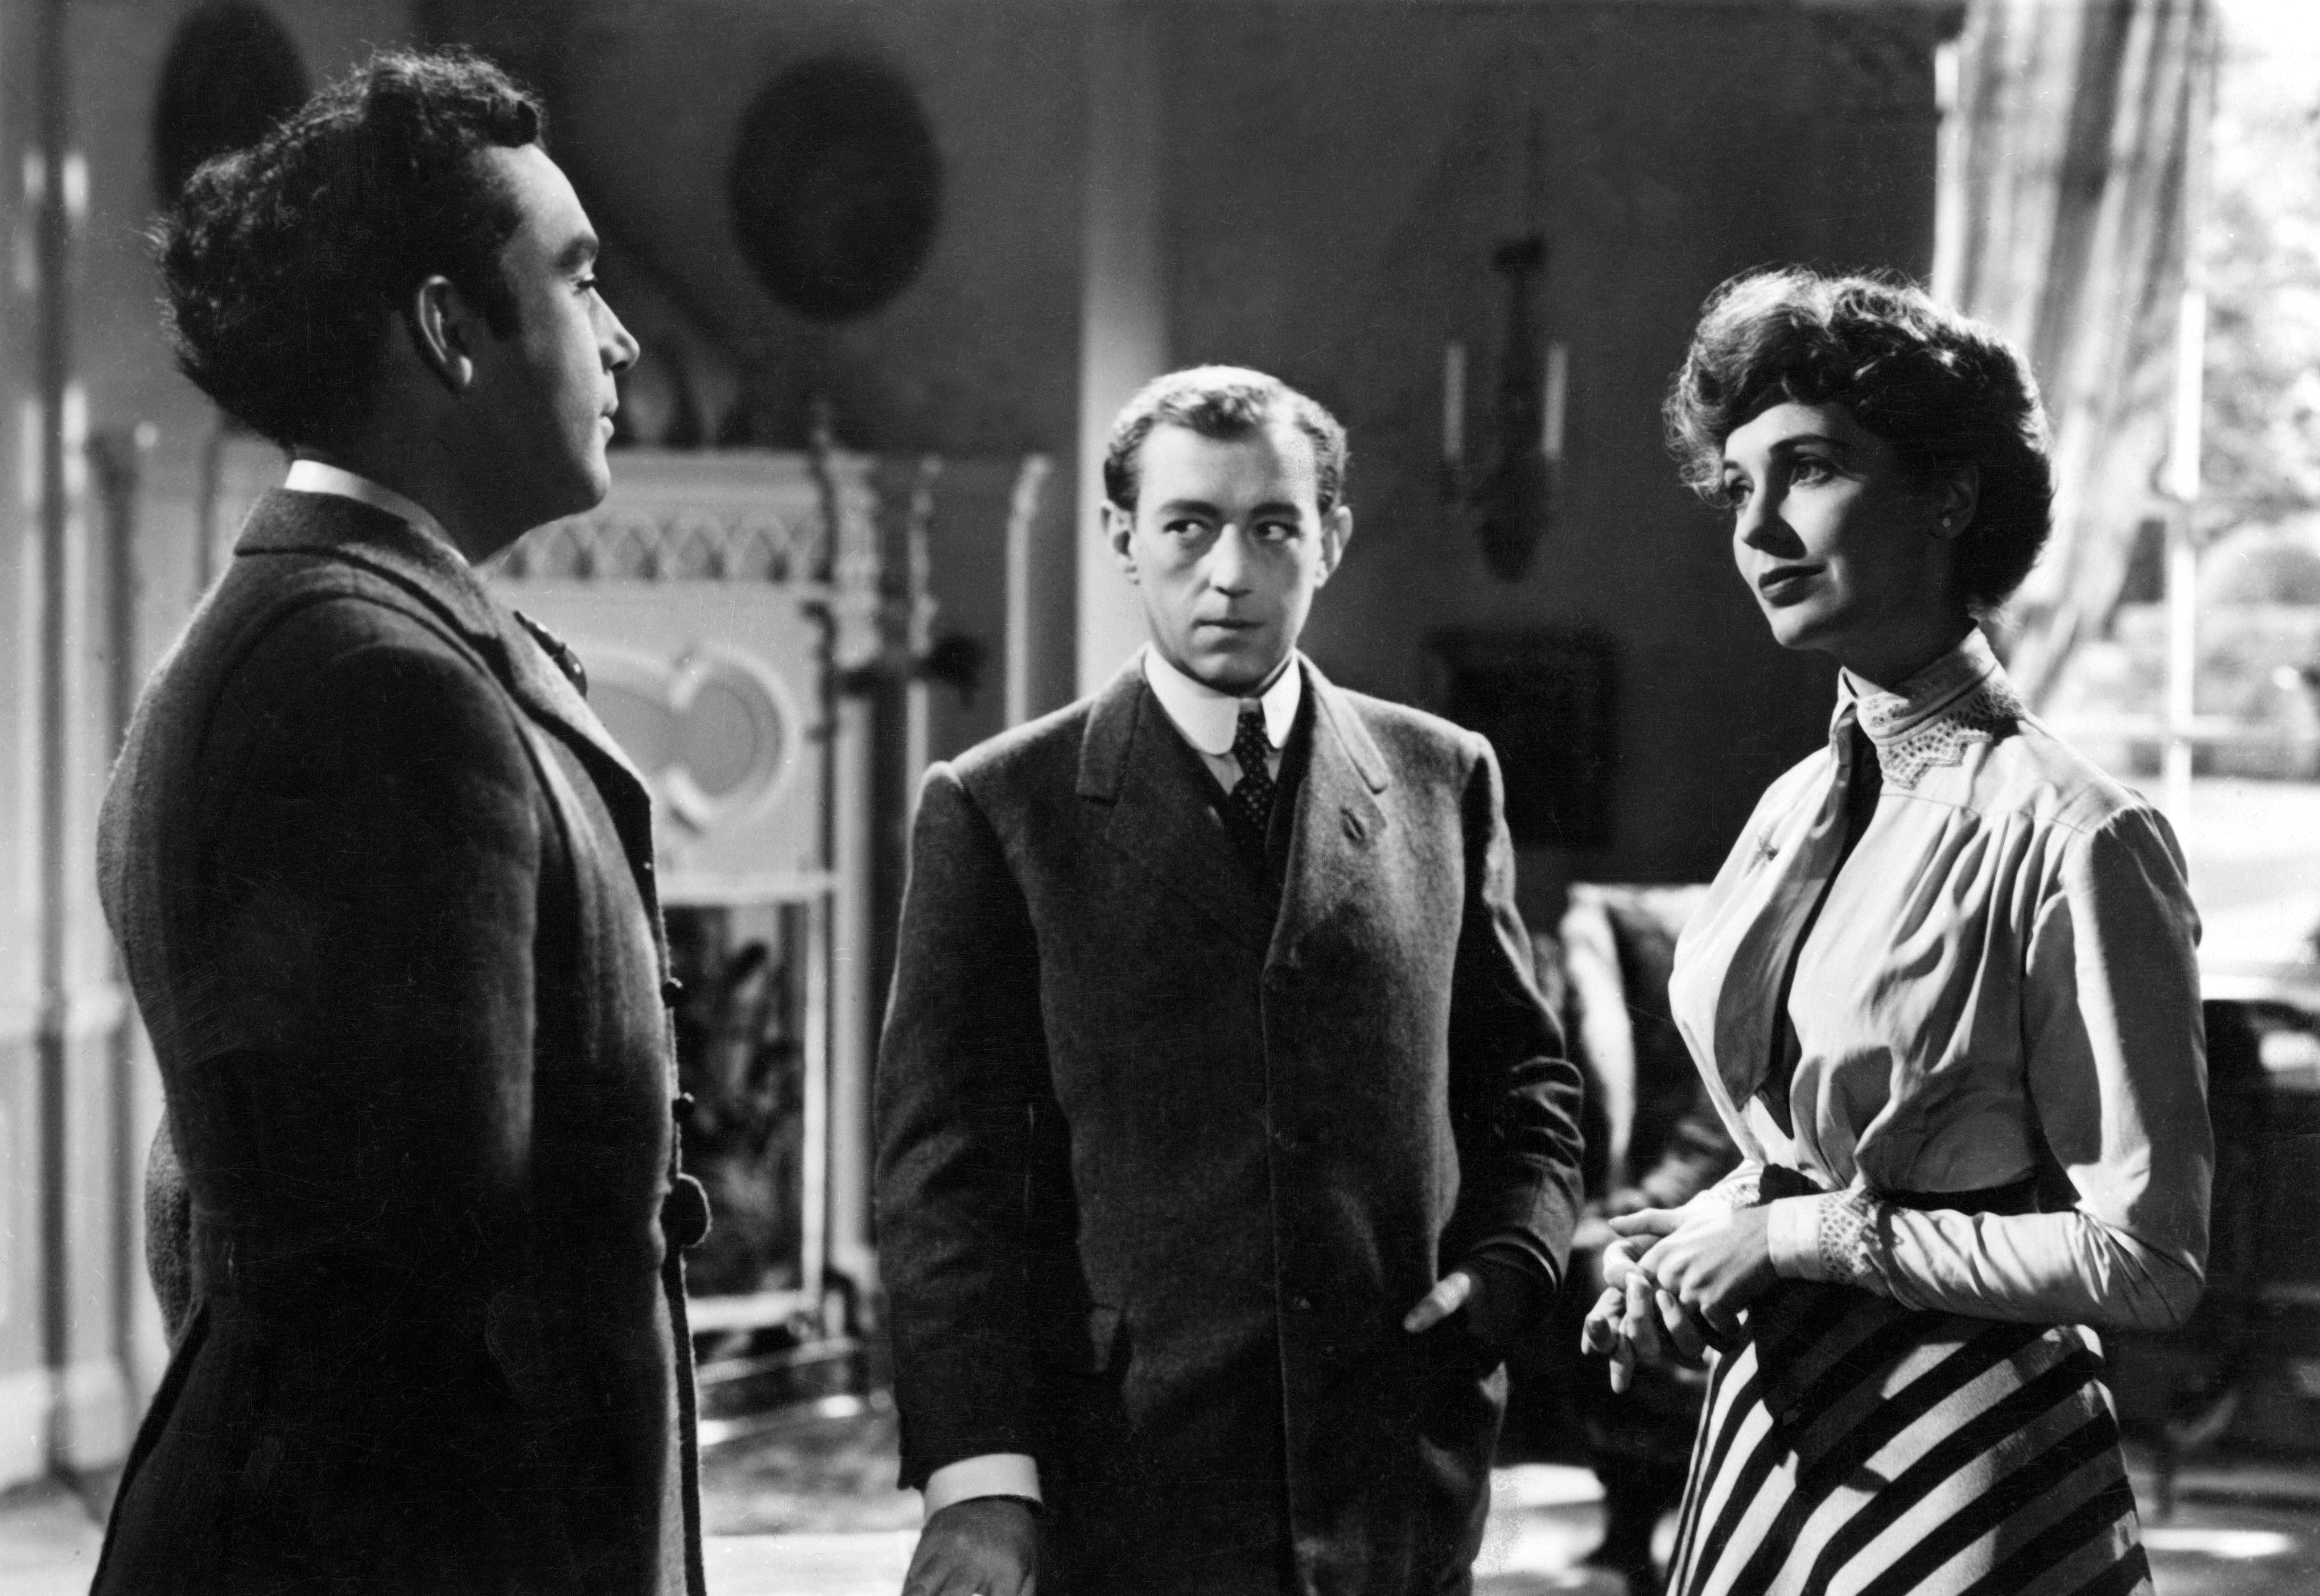 Alec Guinness, Valerie Hobson, and Dennis Price in Kind Hearts and Coronets (1949)